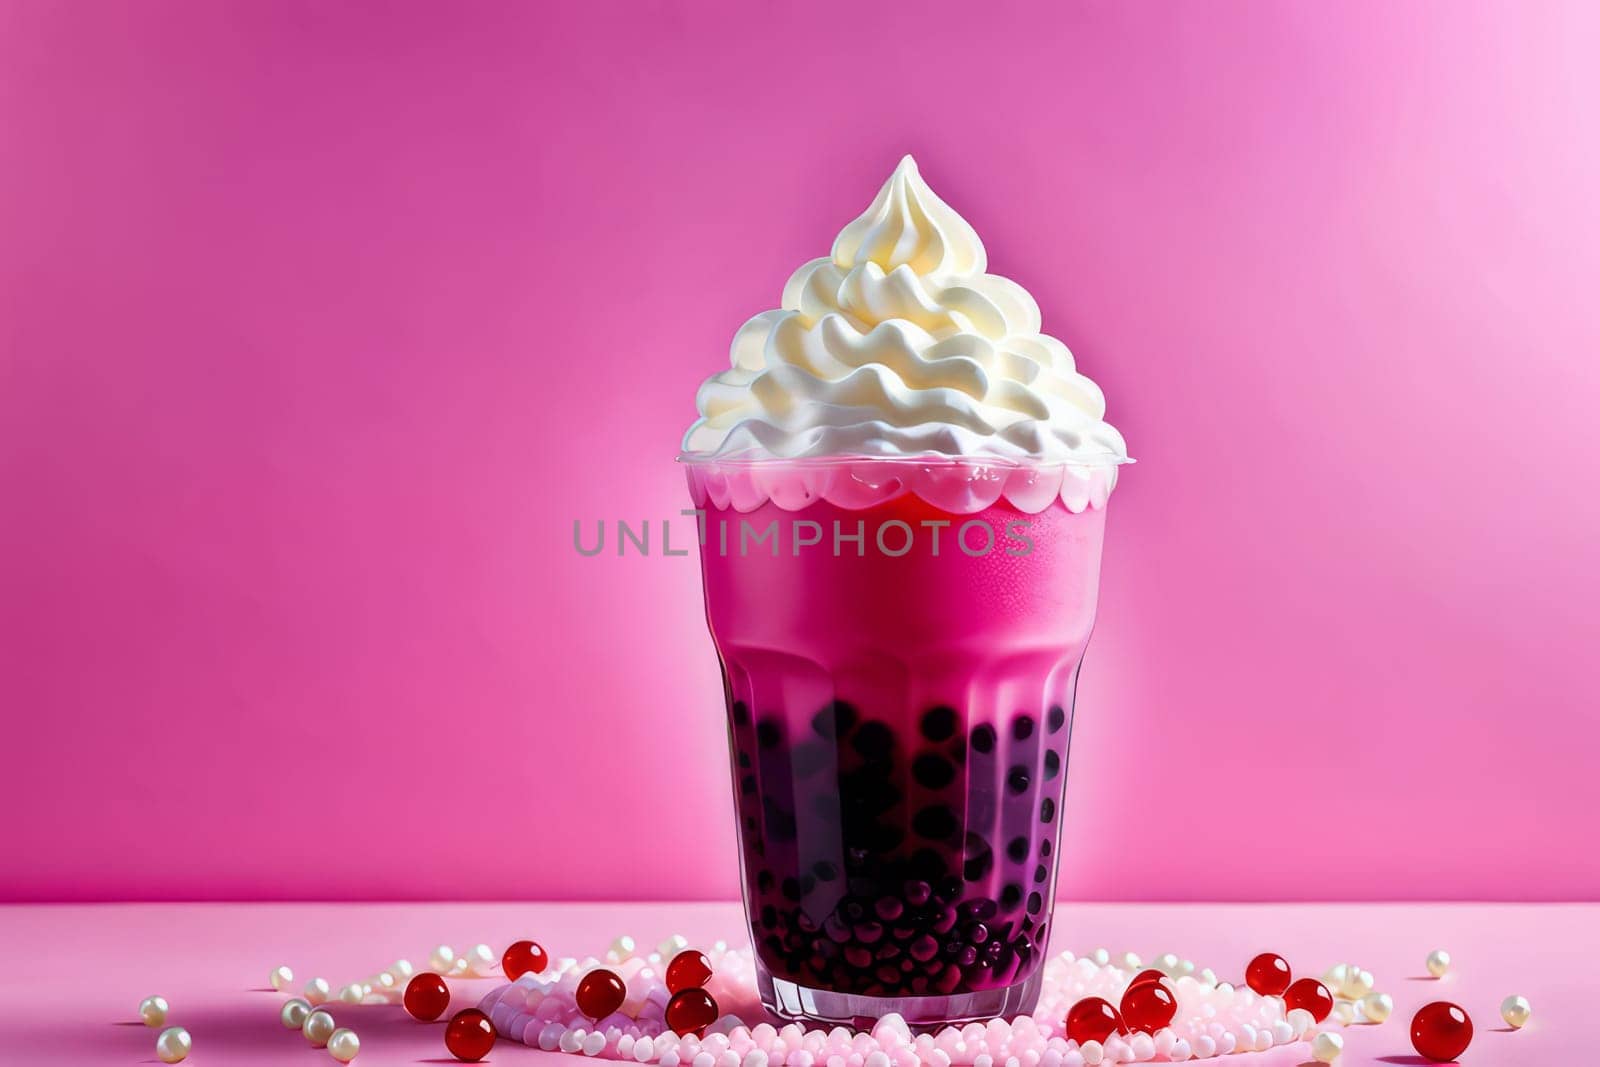 Colorful and joyful scene featuring a sweet pink bubble tea with whipped cream and tapioca pearls. by Annu1tochka